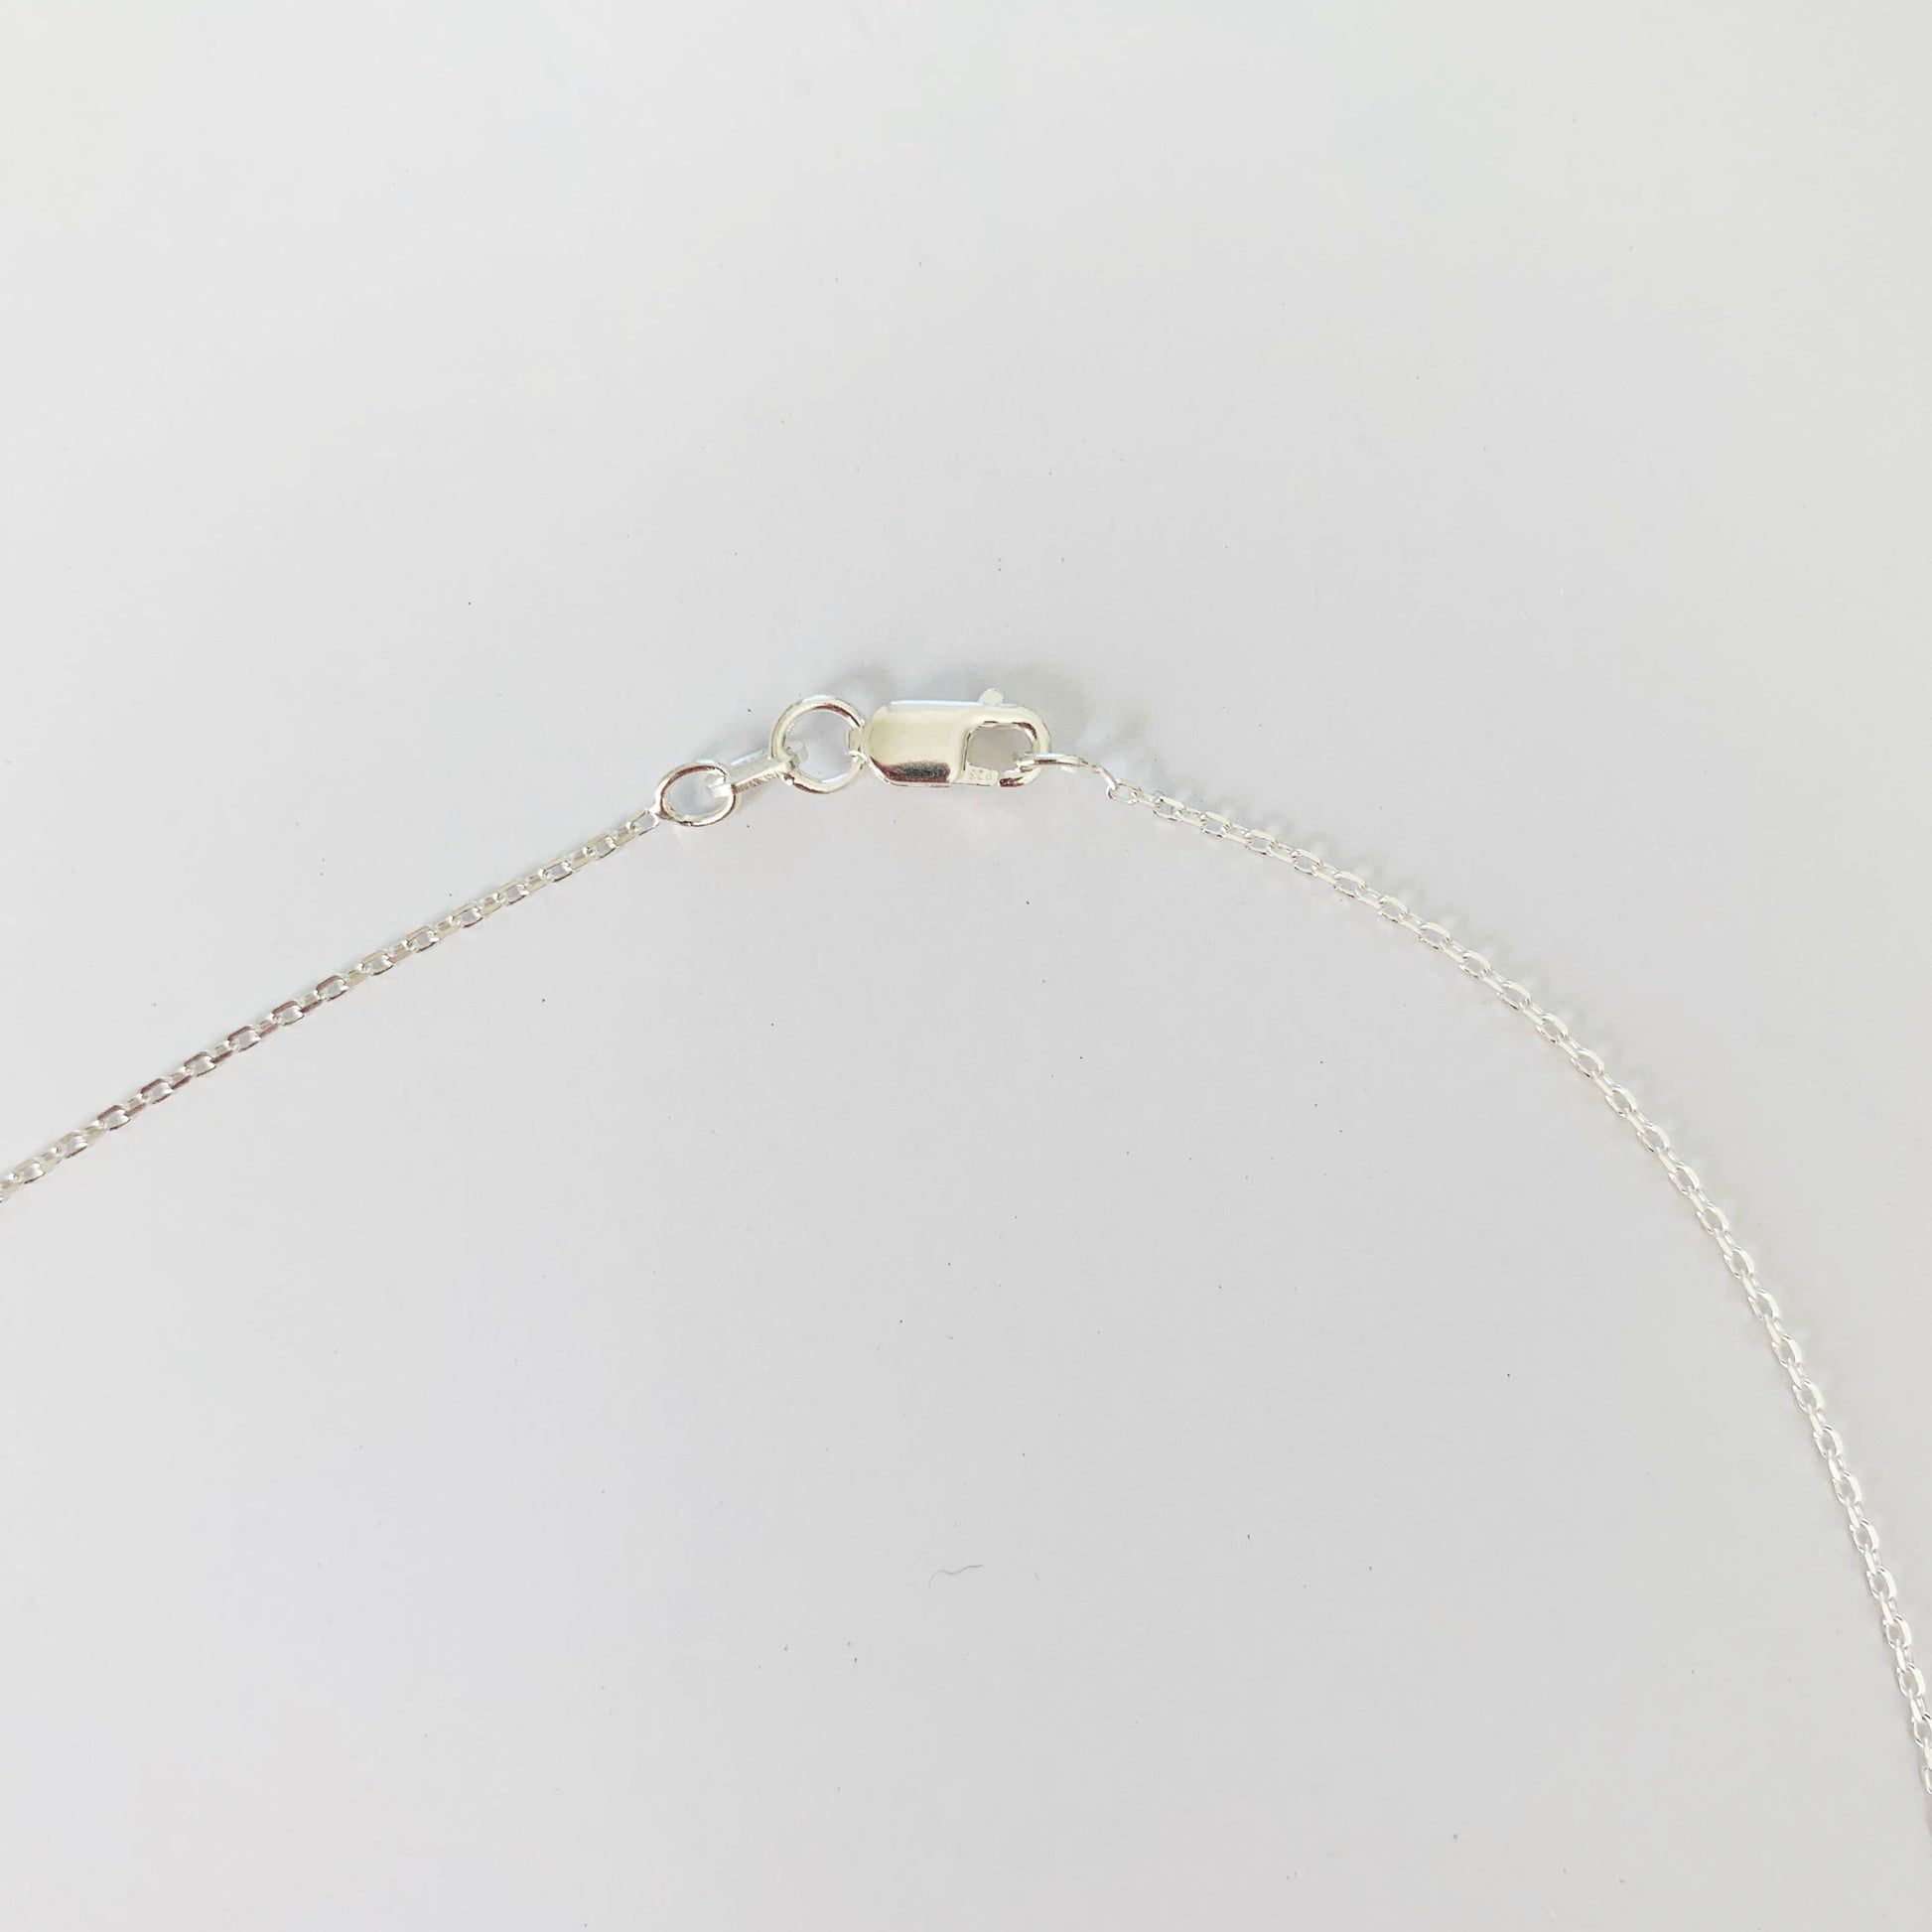 the newport gala necklace has a lobster claw clasp pictured here on a white surface